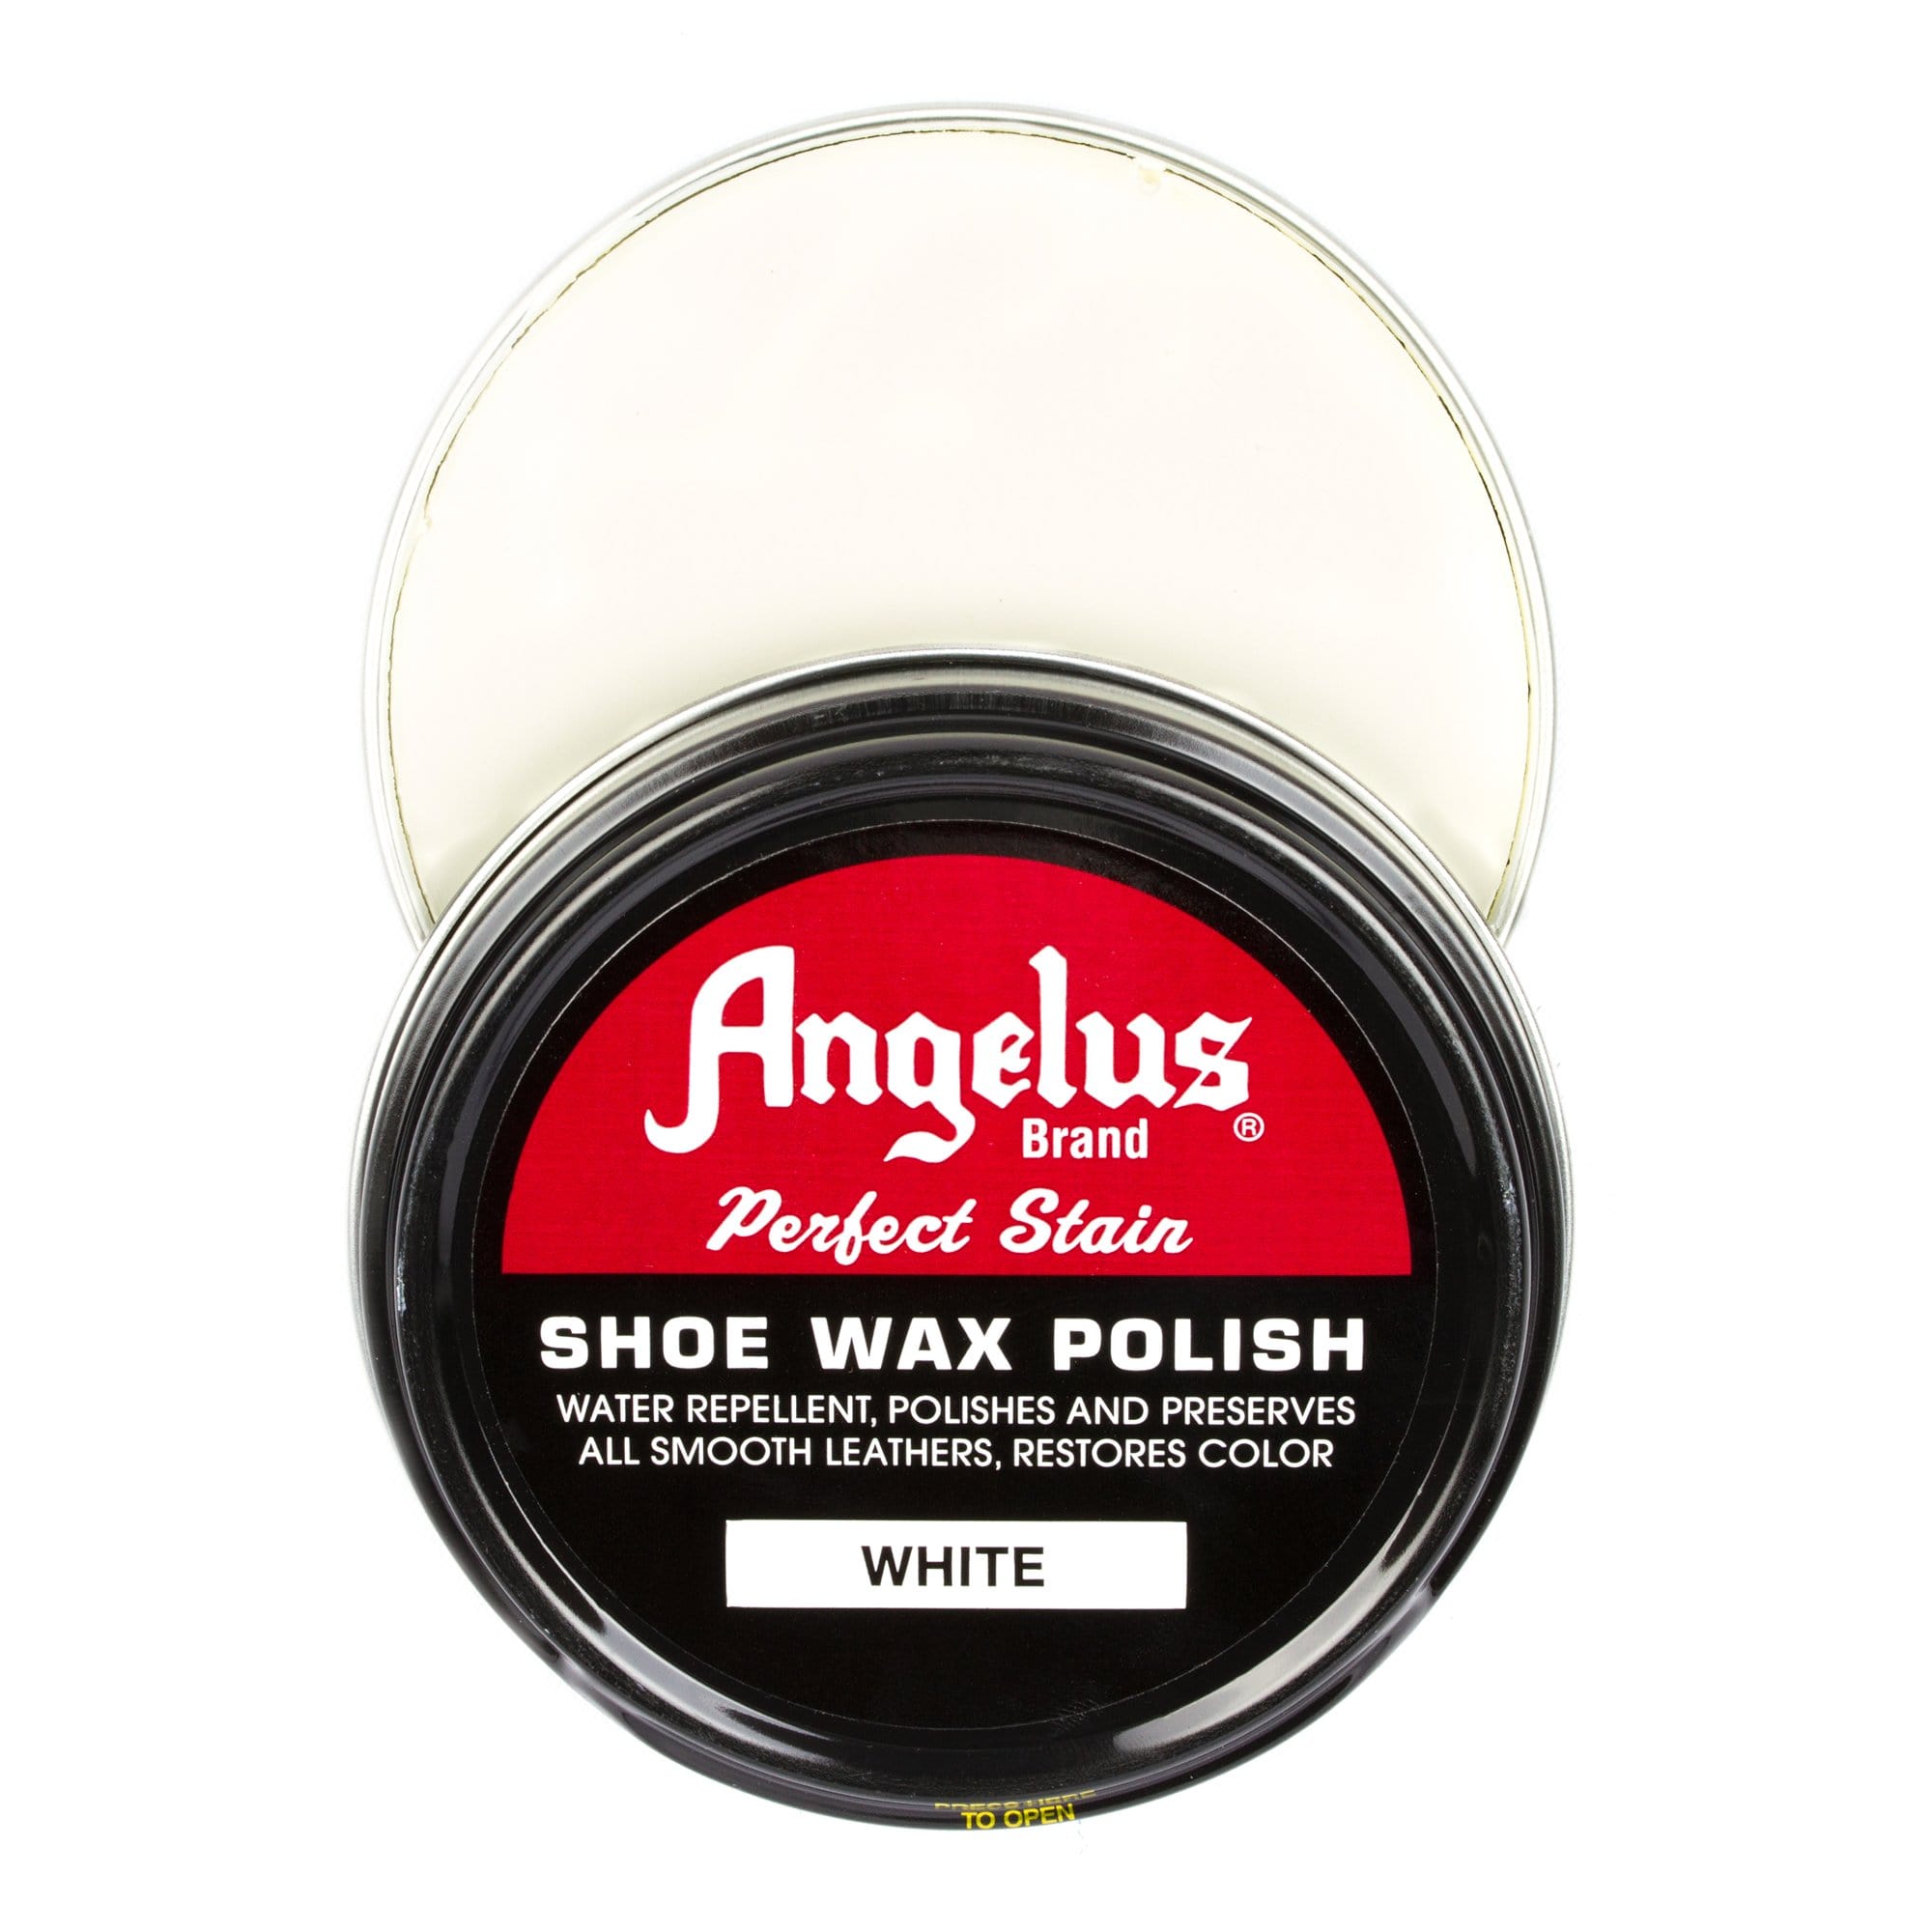 TONG'S White Shoe Cleaning Cream